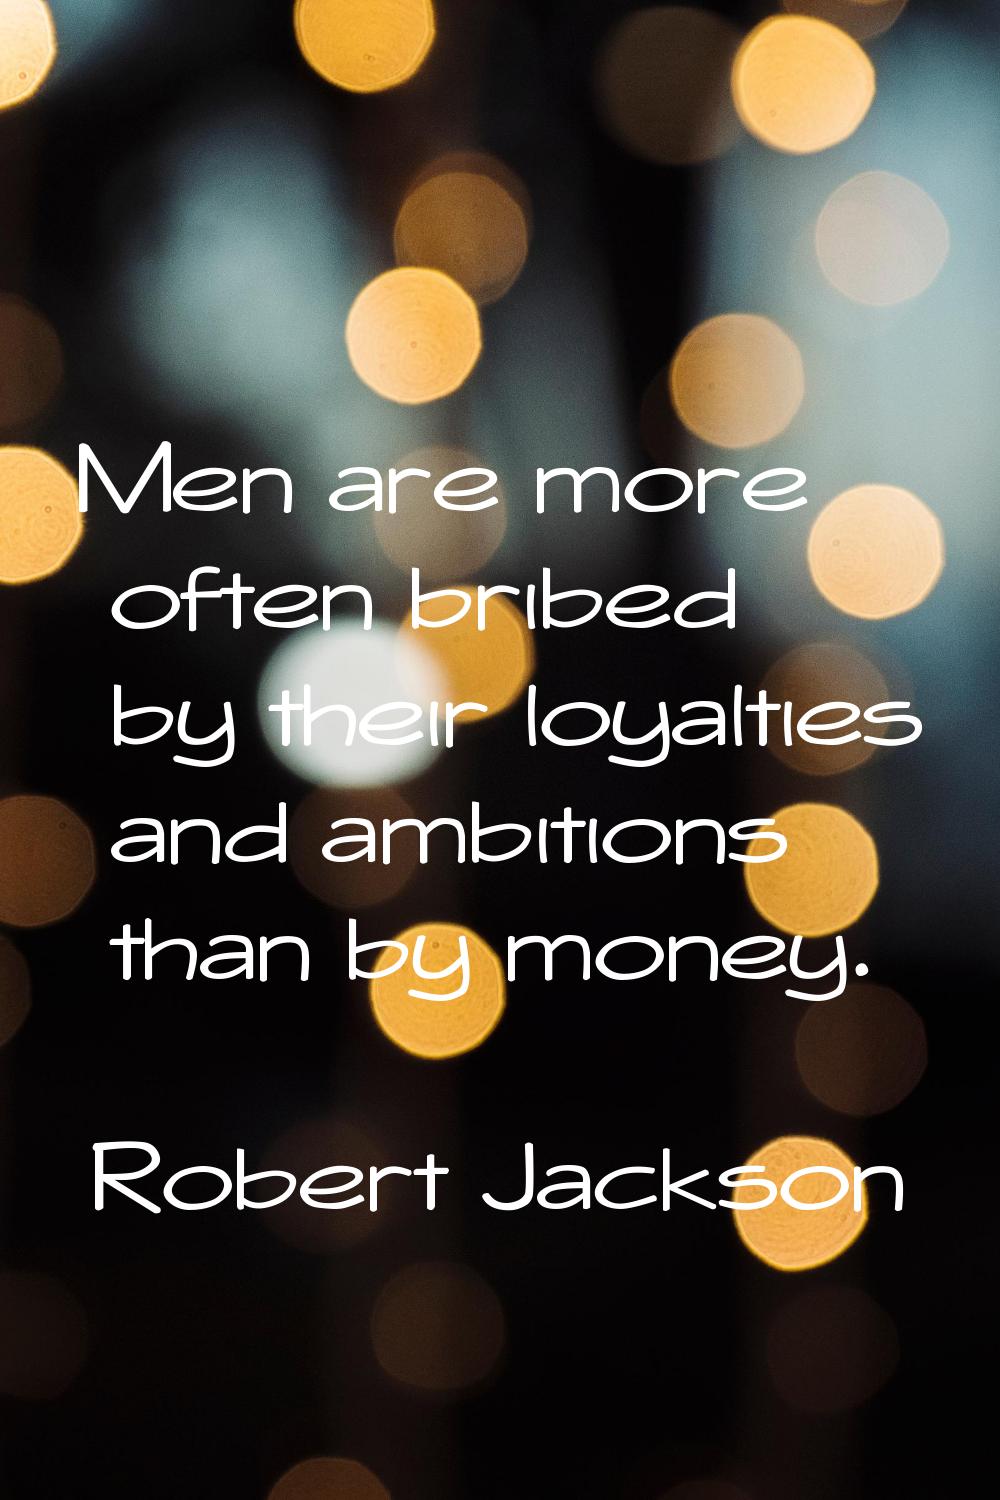 Men are more often bribed by their loyalties and ambitions than by money.